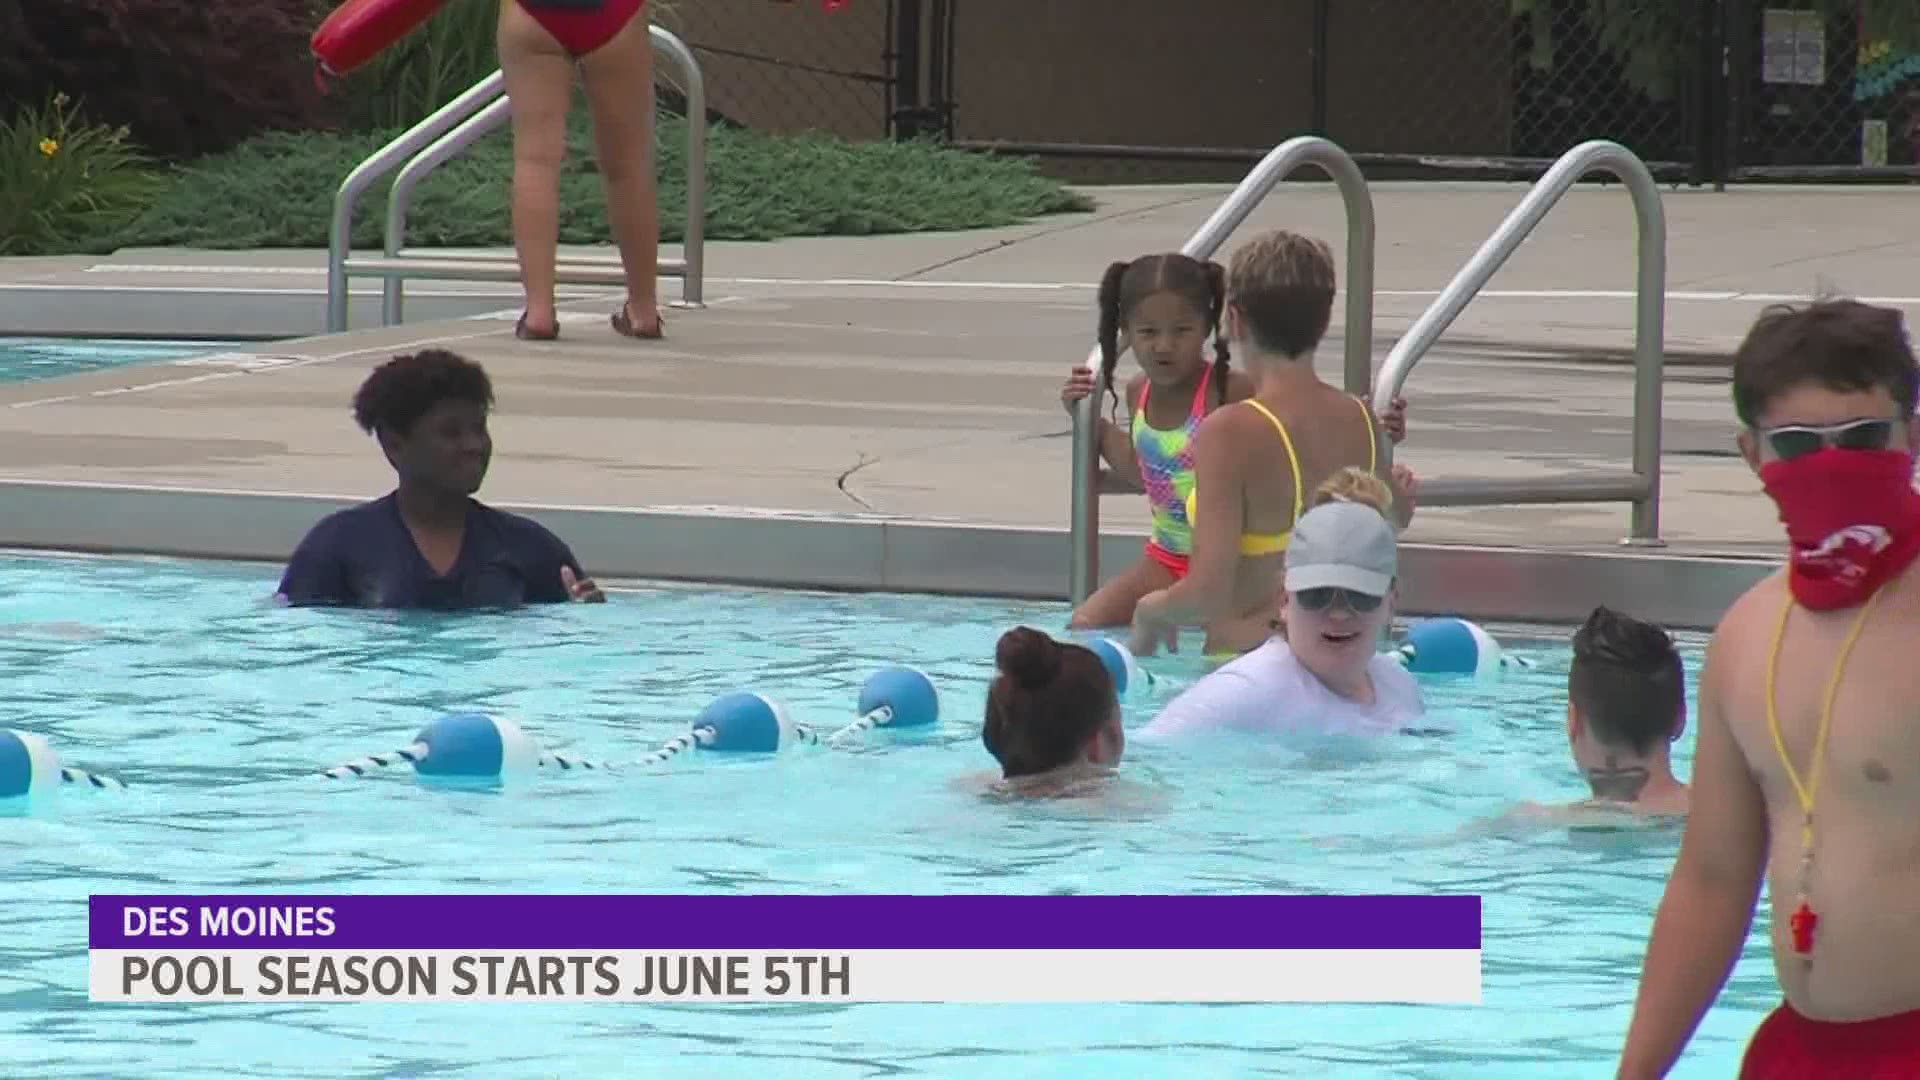 Leaders said they're looking for 132 lifeguards to fully staff its five pools and aquatic centers.